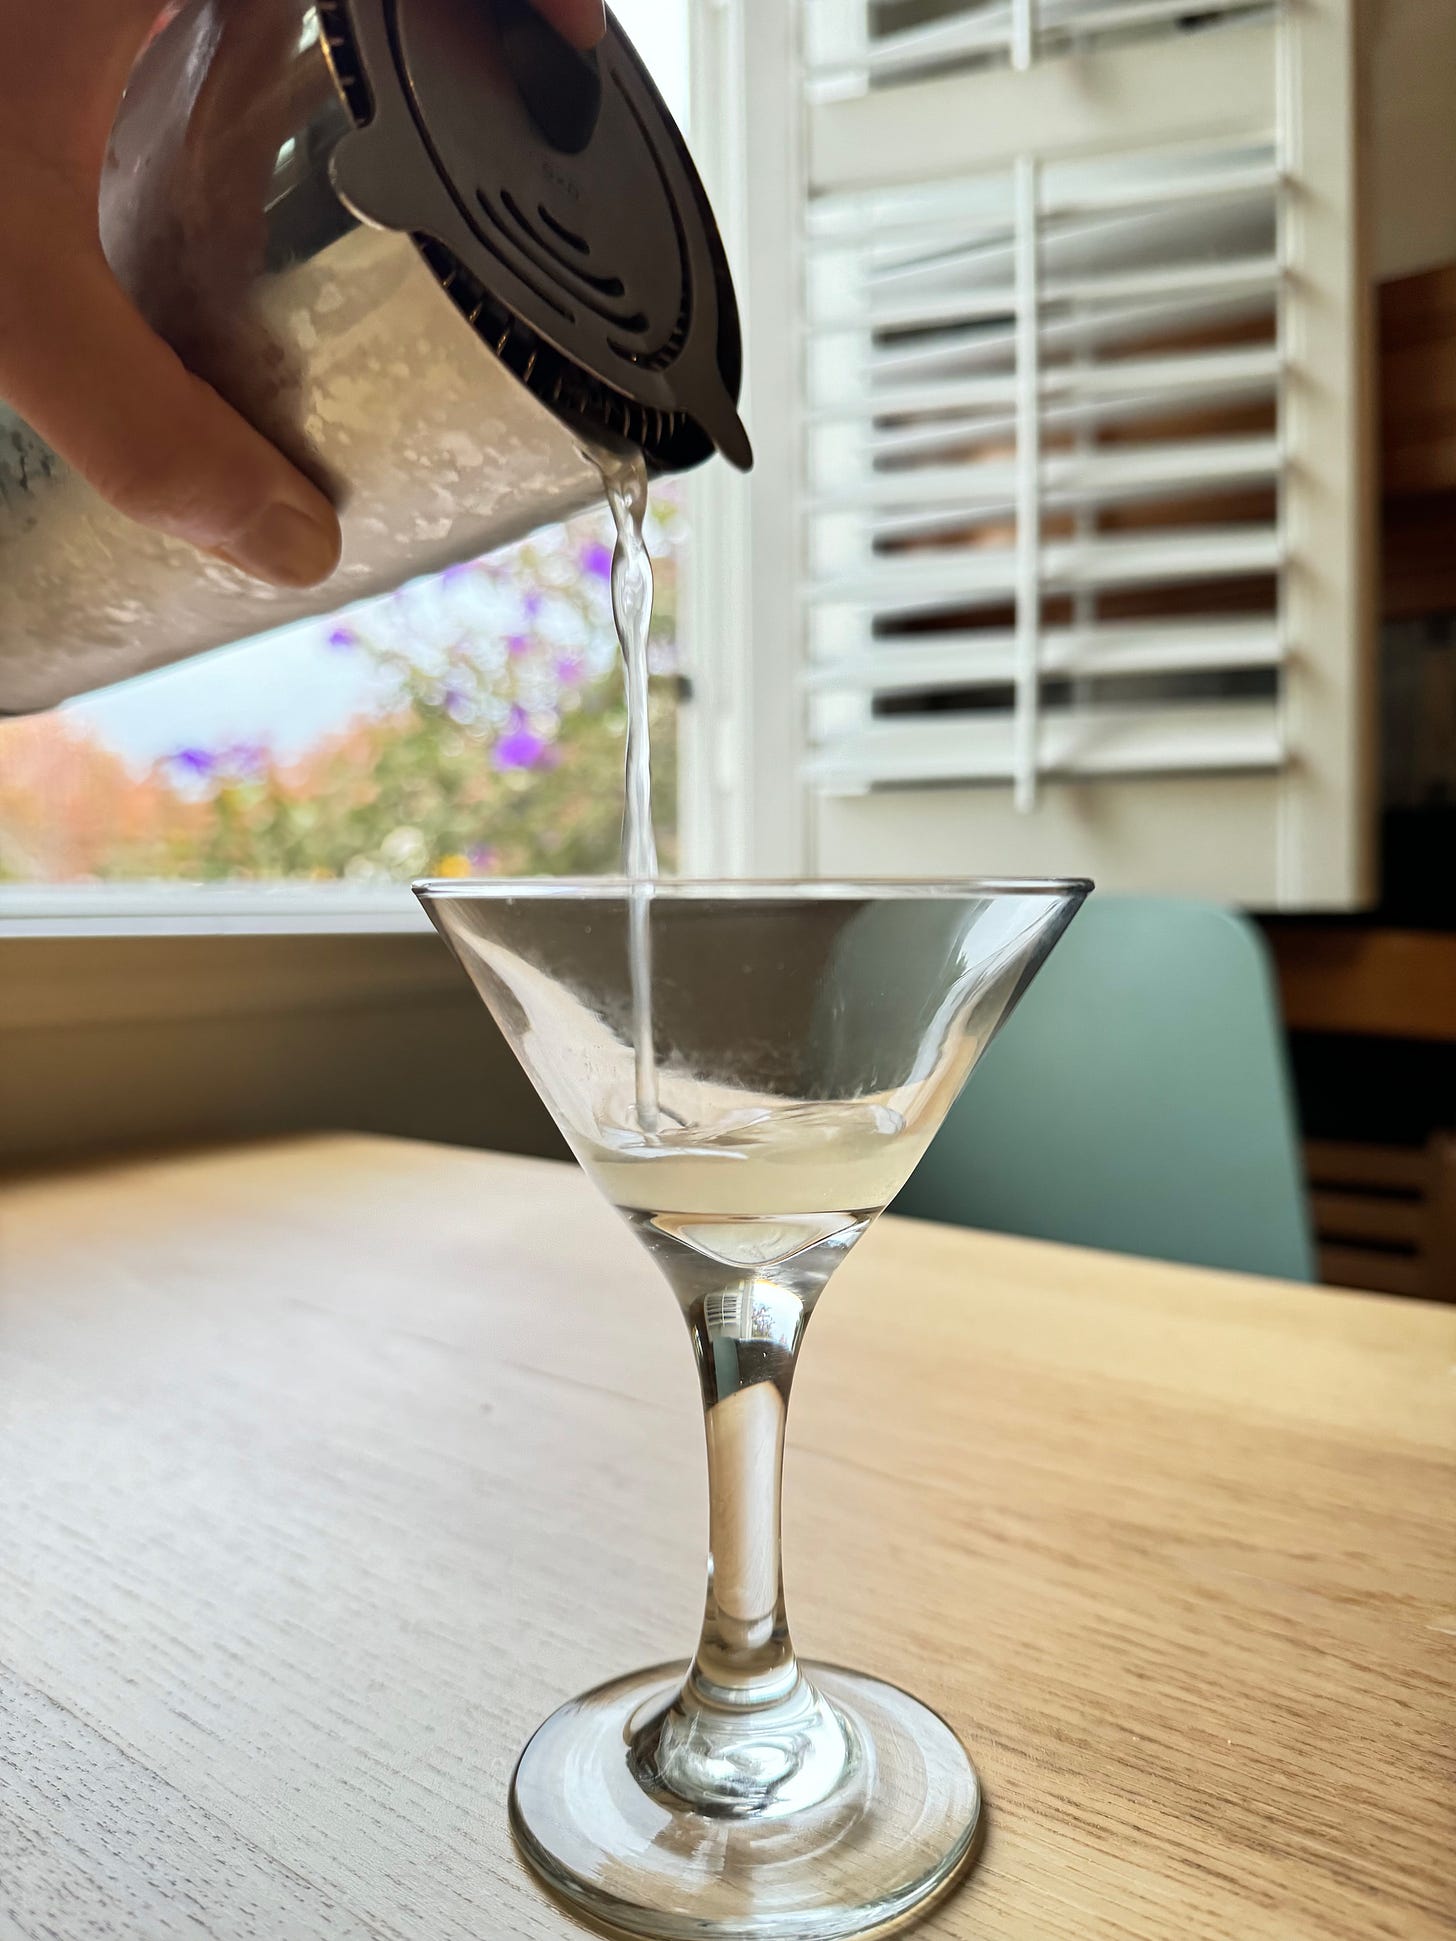 Pouring a cocktail into a glass